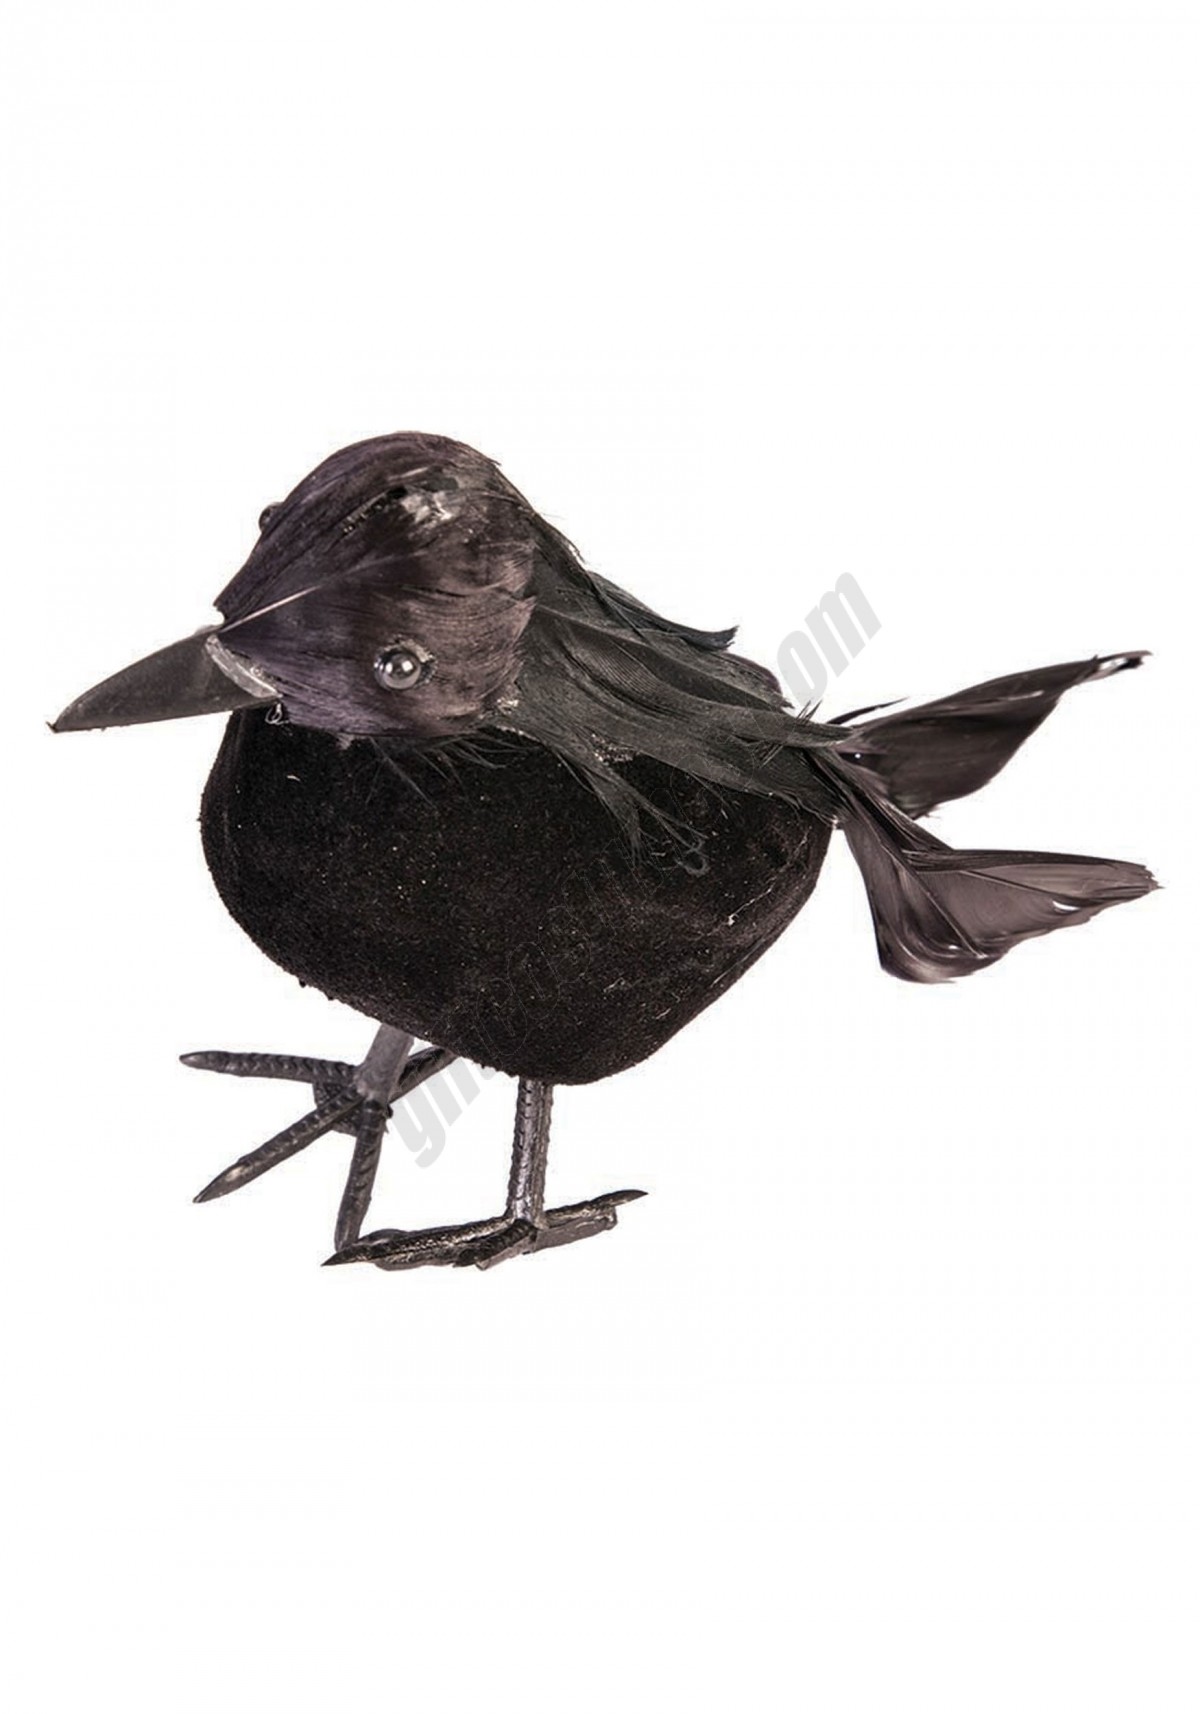 Black Crow - 5 Inches Tall Promotions - -0